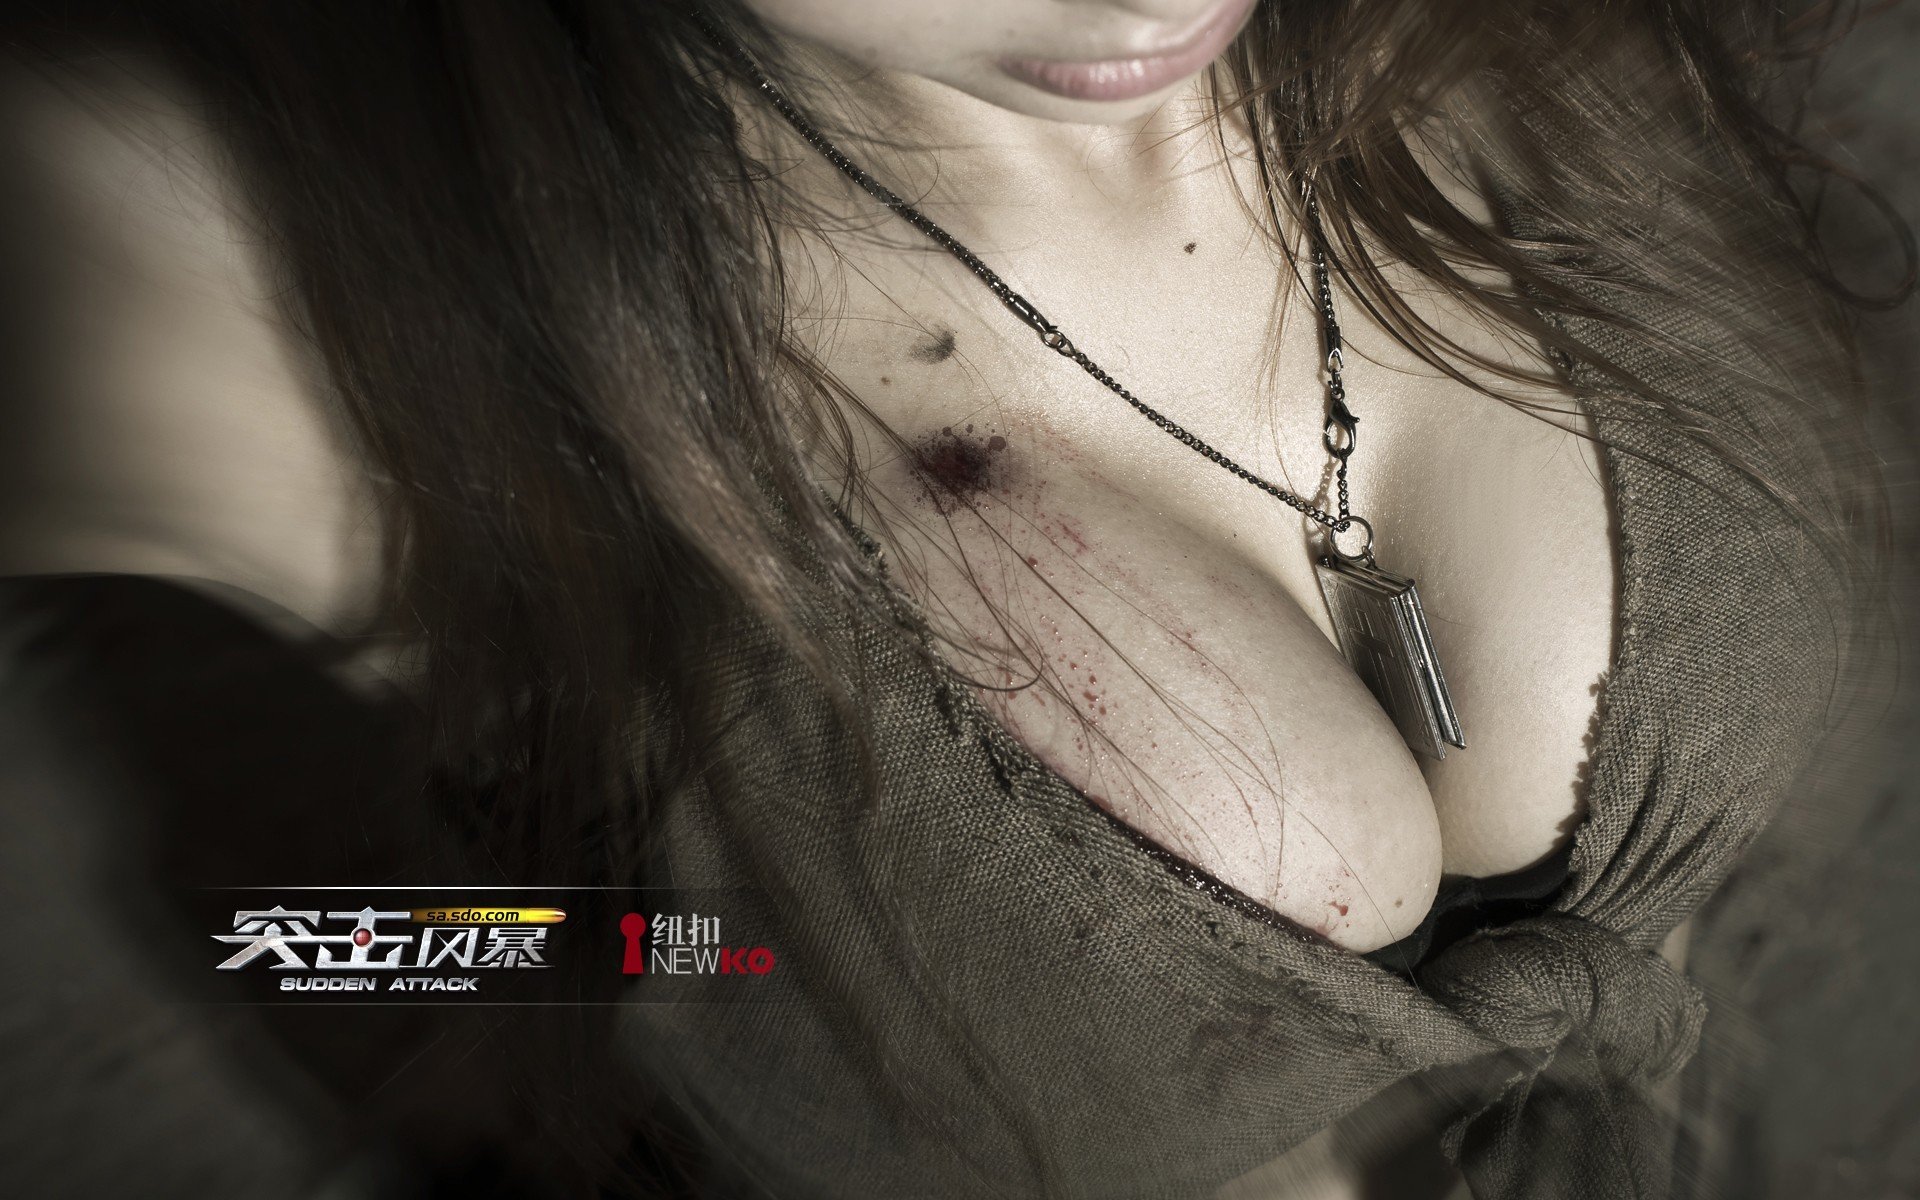 Action Online Tactical Fighting Cosplay Sexy Babe Wallpaper Background